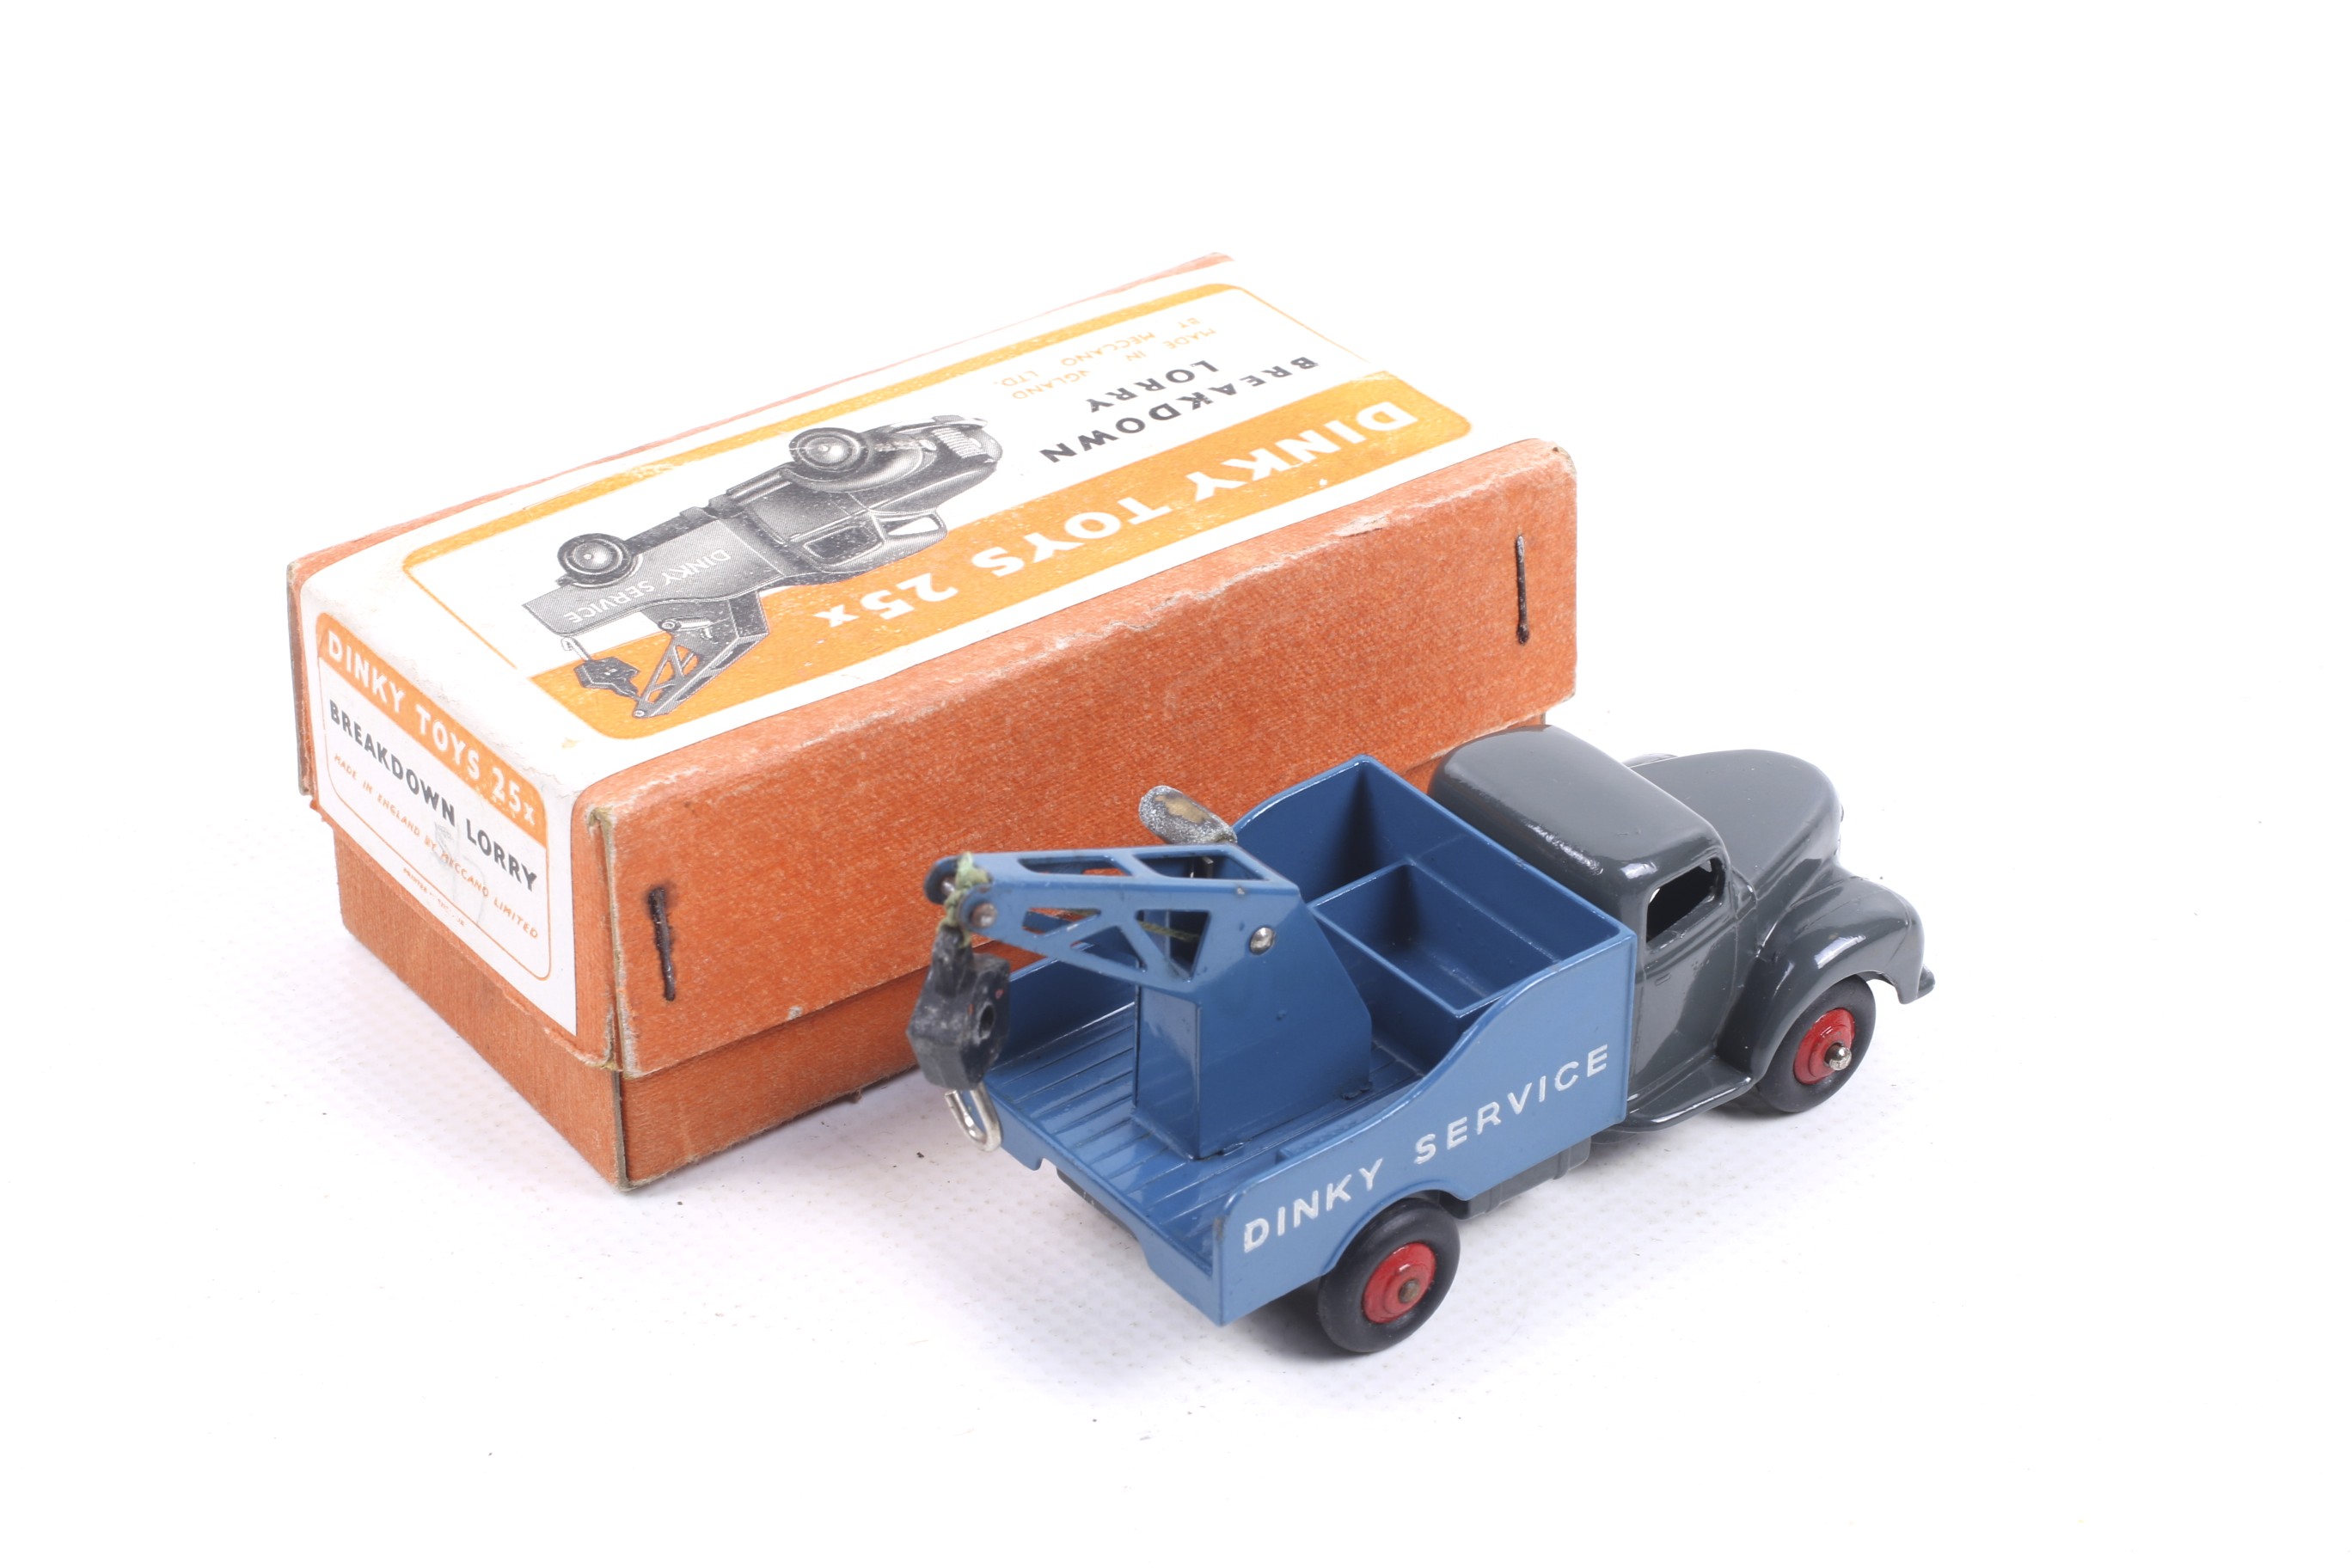 A Dinky diecast breakdown lorry. No. 25X with grey body and blue bed, in original box. - Image 2 of 2